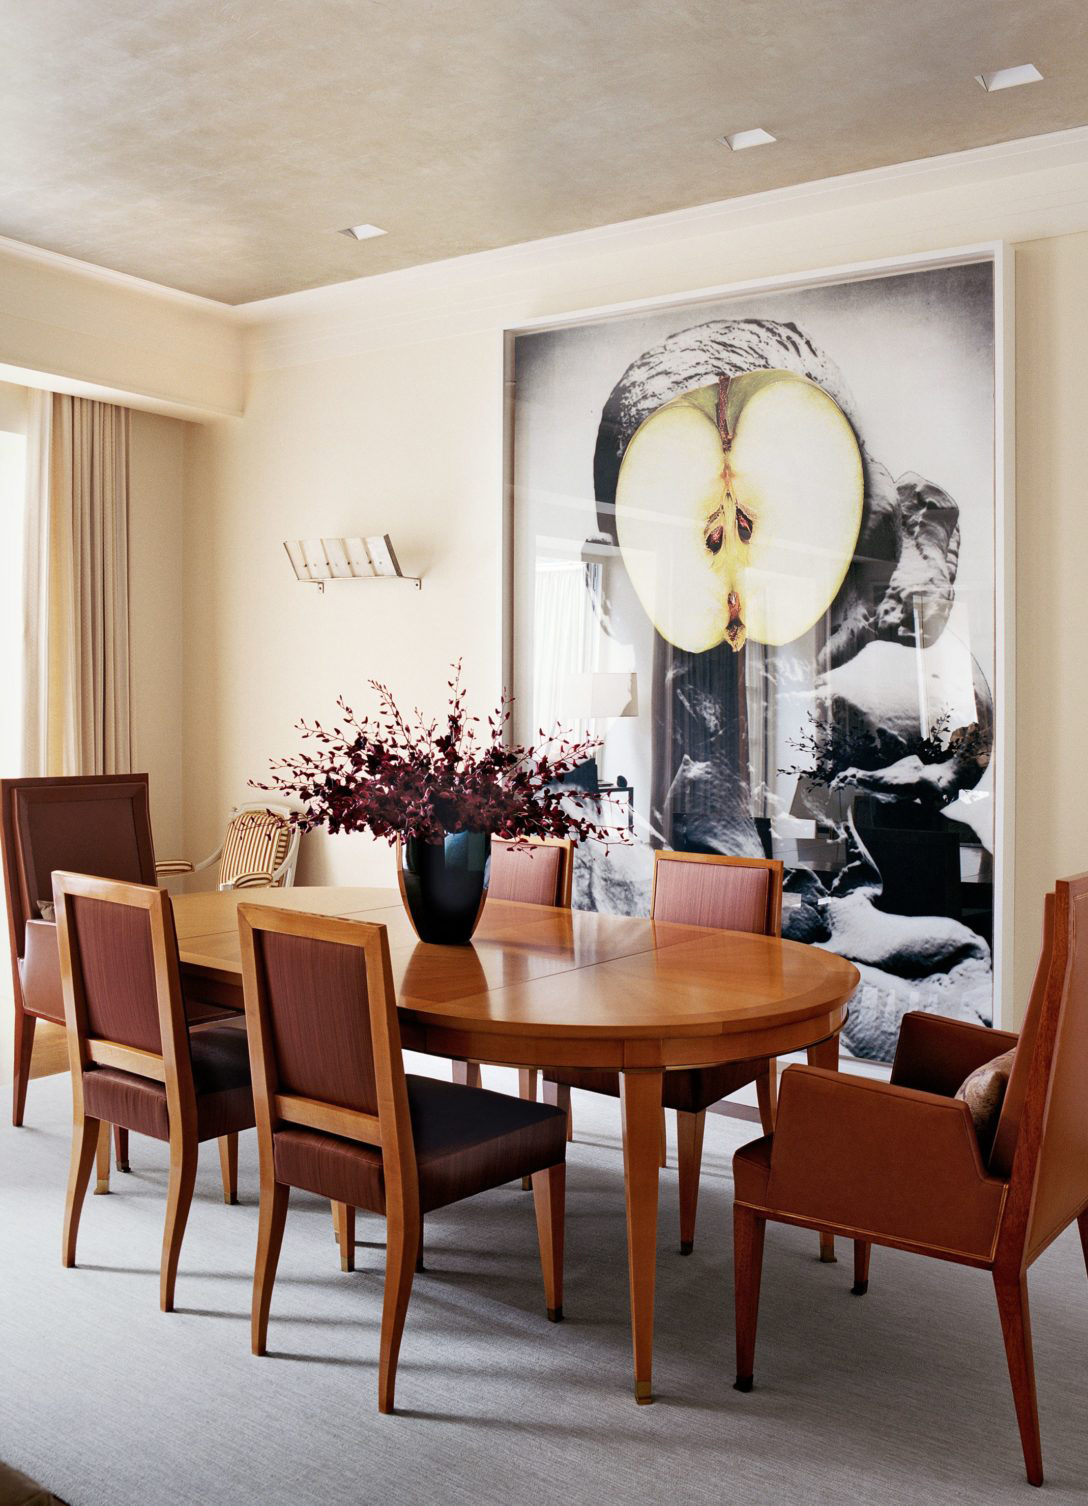 Dining Room Of The Stars 5 Stunning Celebrity Dining Rooms To Inspire! 2